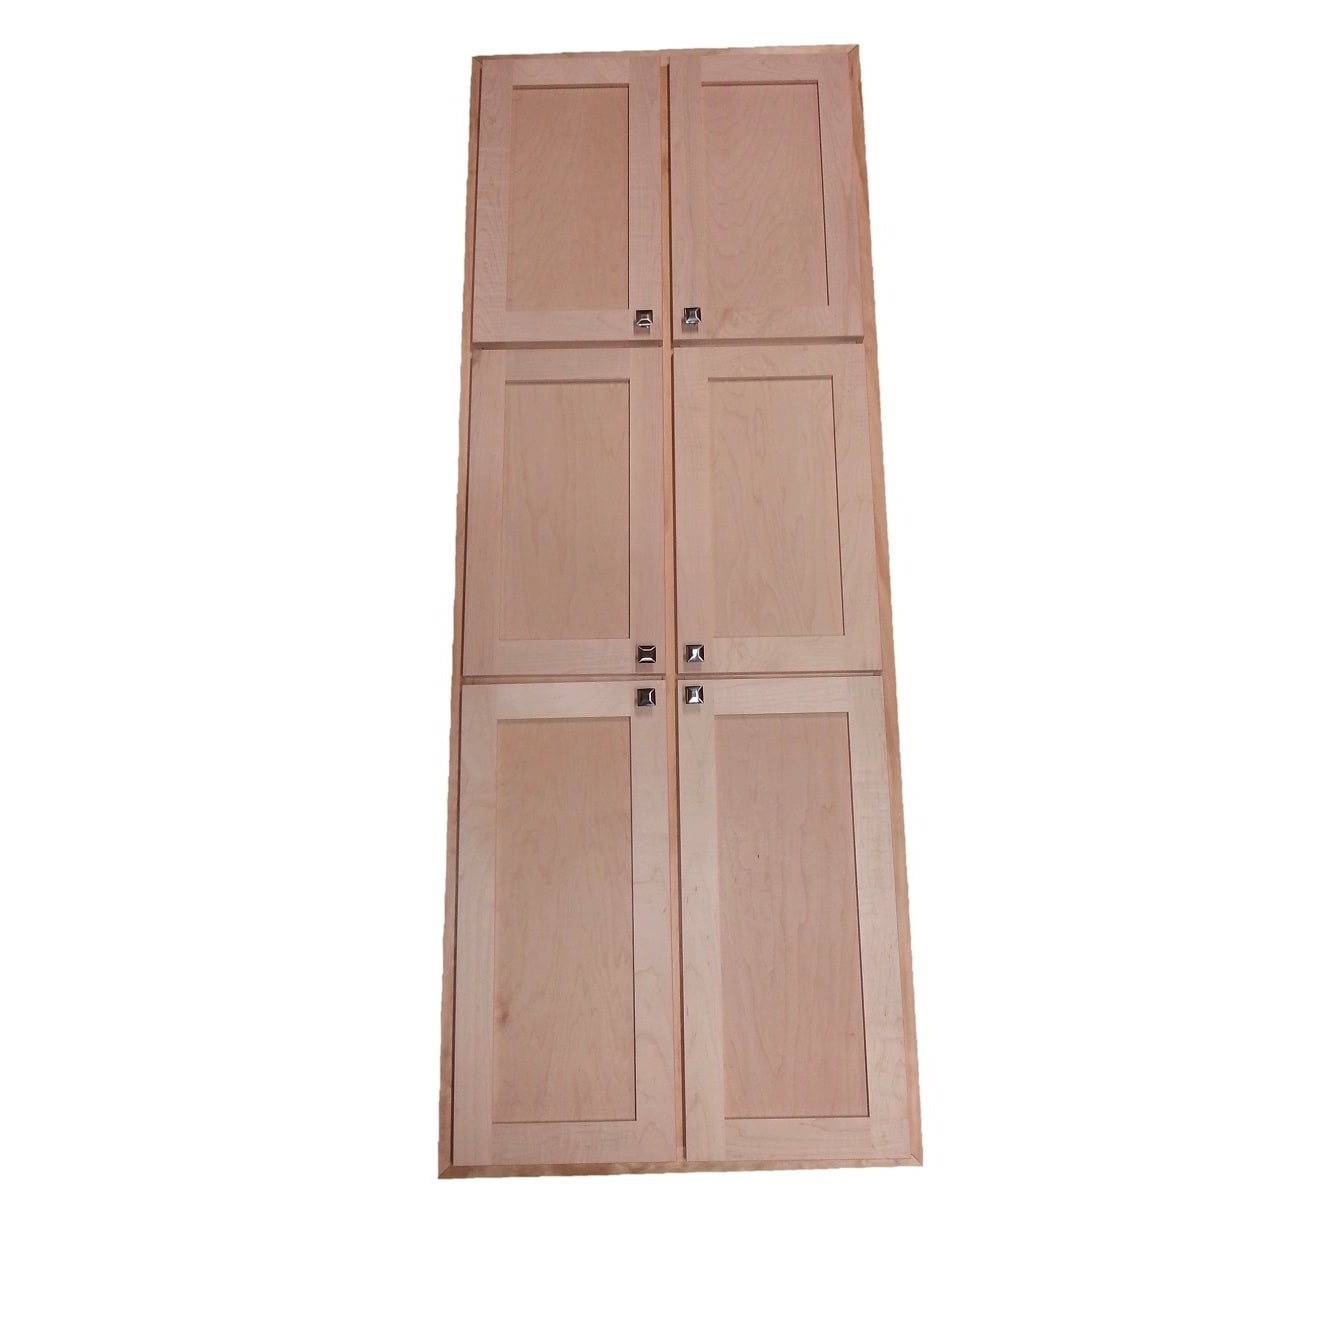 Shop Wg Wood Products Unfinished Wood 42 Inch Recessed Double Door